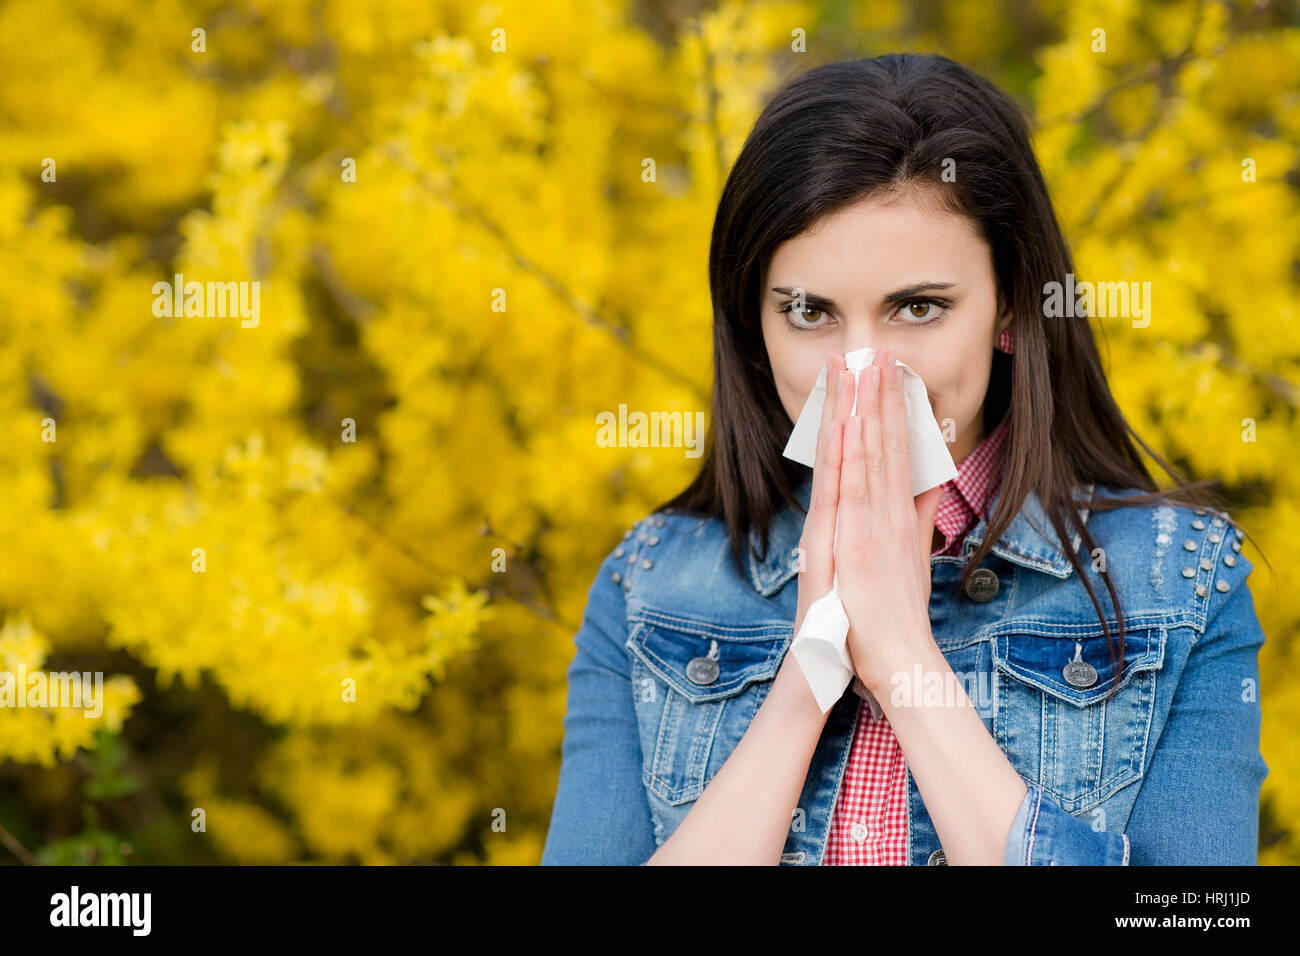 Junge Frau mit Allergie - woman with allergy Stock Photo